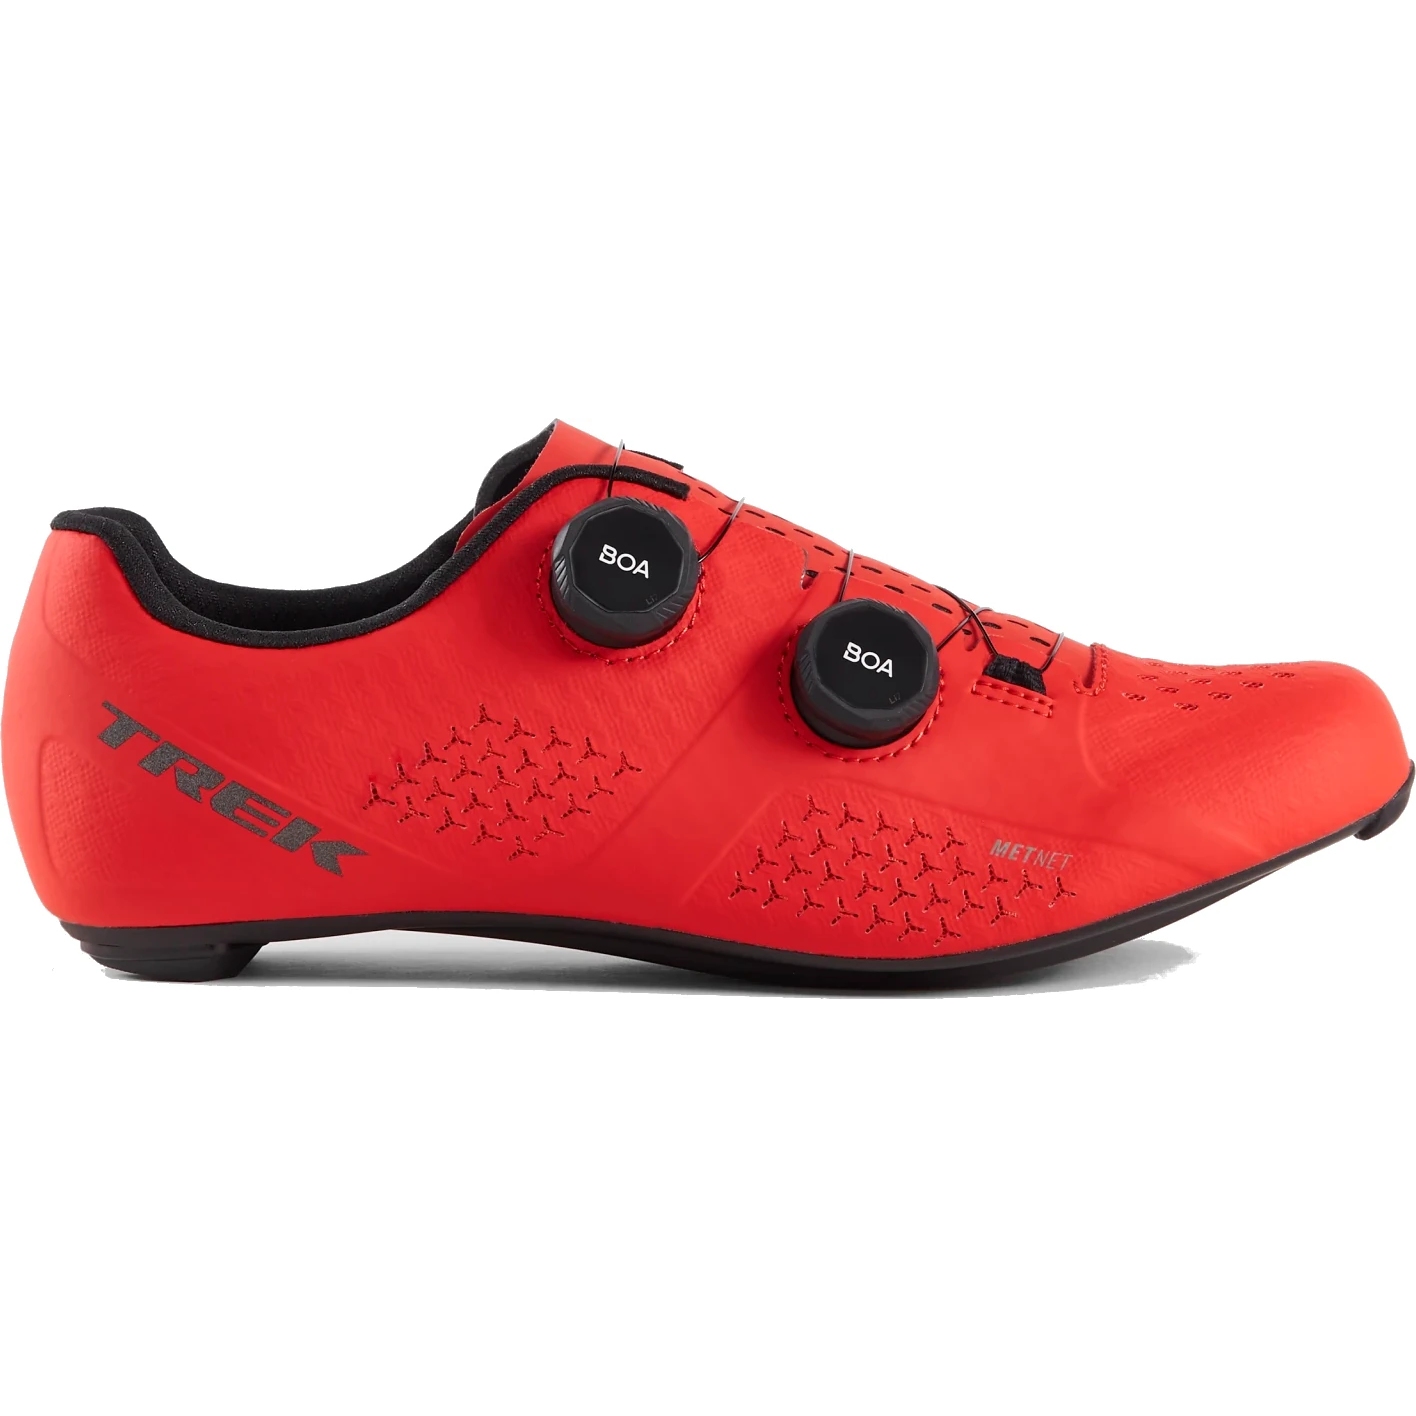 Picture of Trek Velocis Road Cycling Shoes - Red